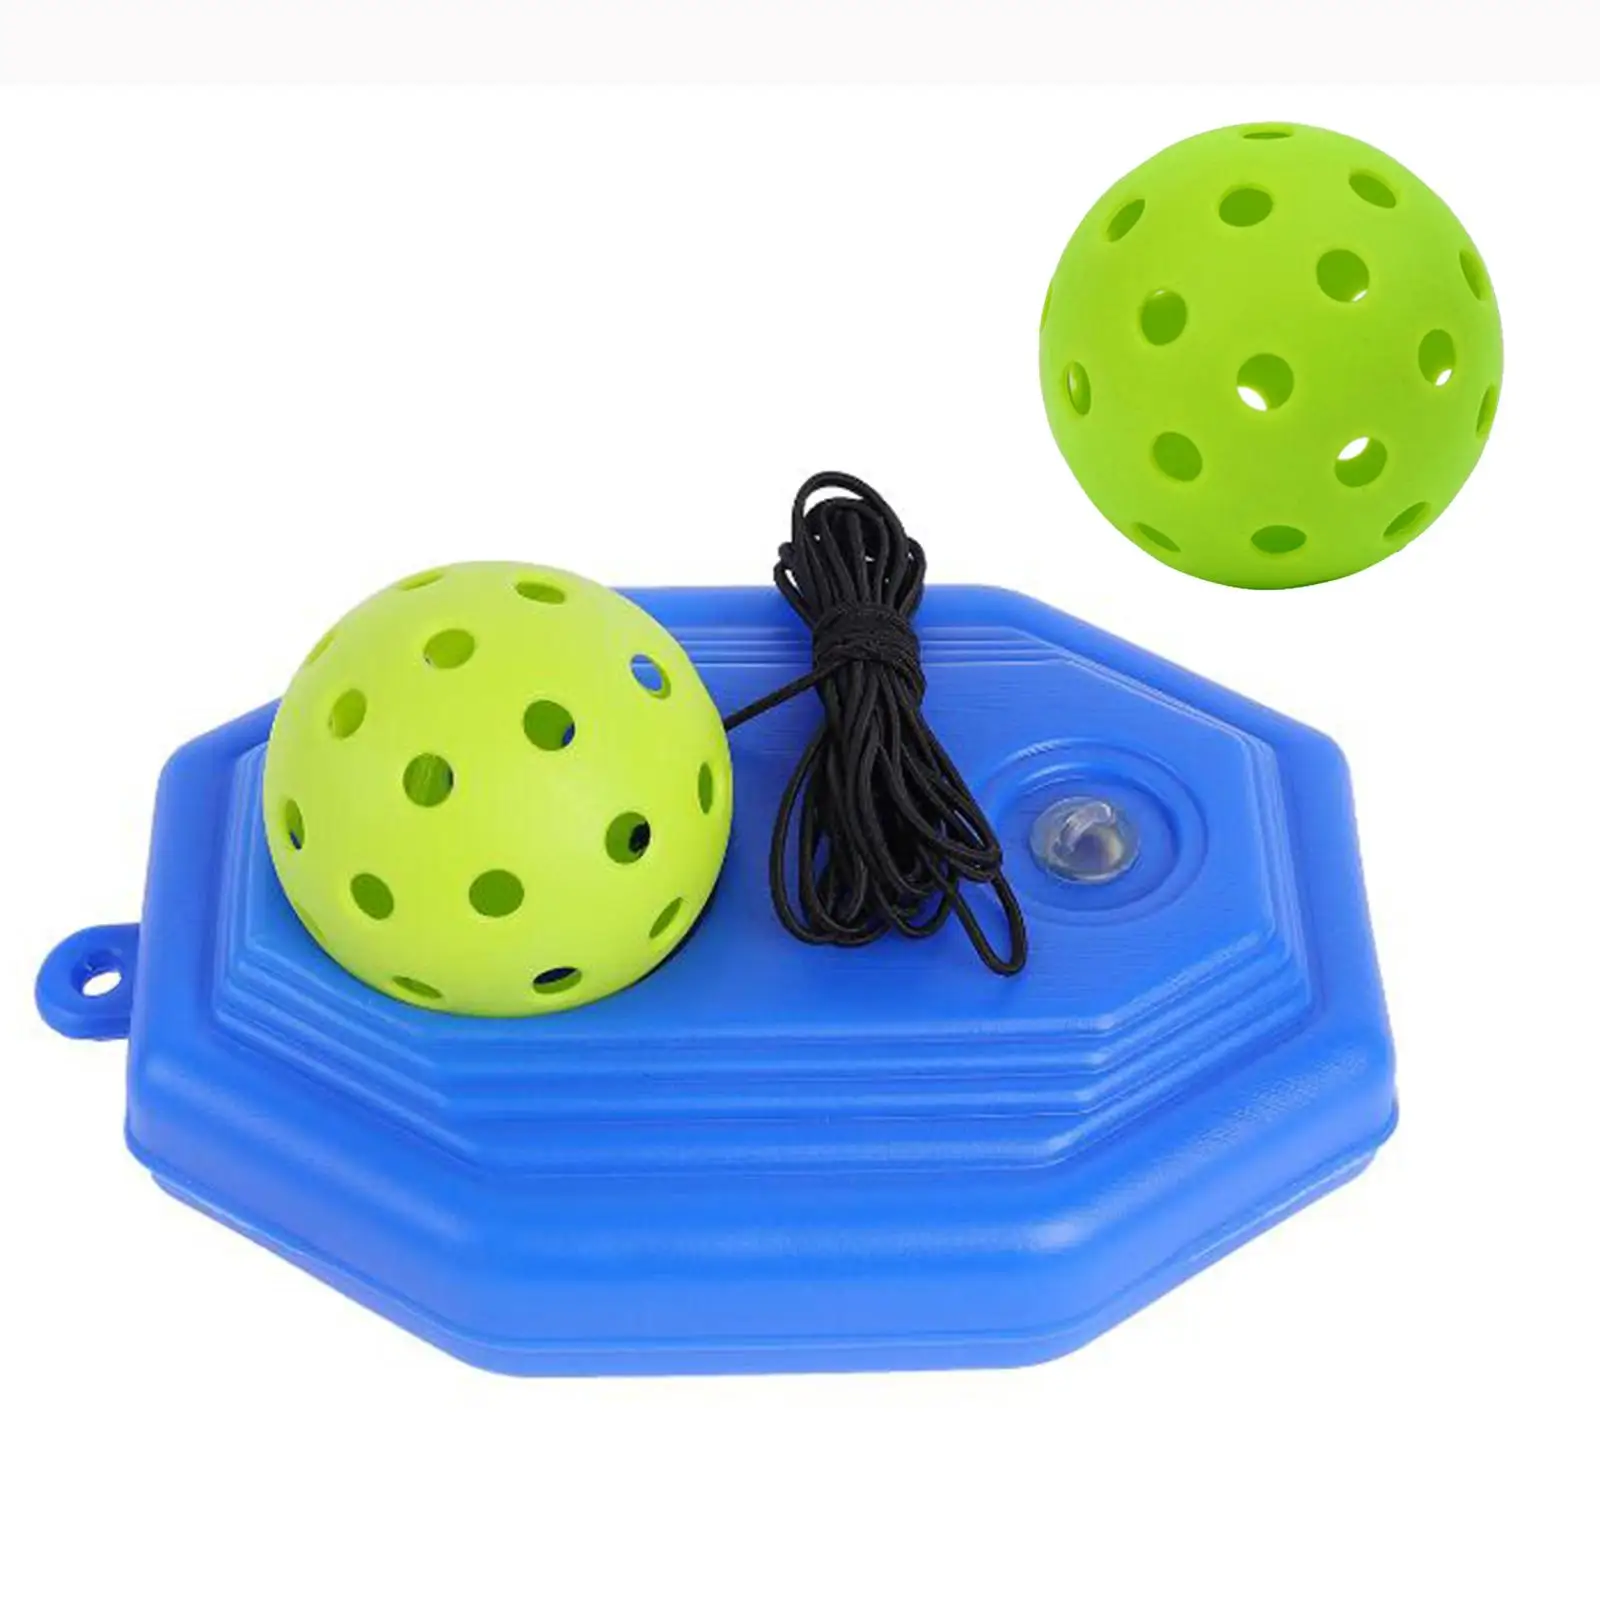 Pickleball Trainer Pickleball Ball with String Pickleball Training Tool for Solo Tennis Training Adult Kids Indoor Outdoor